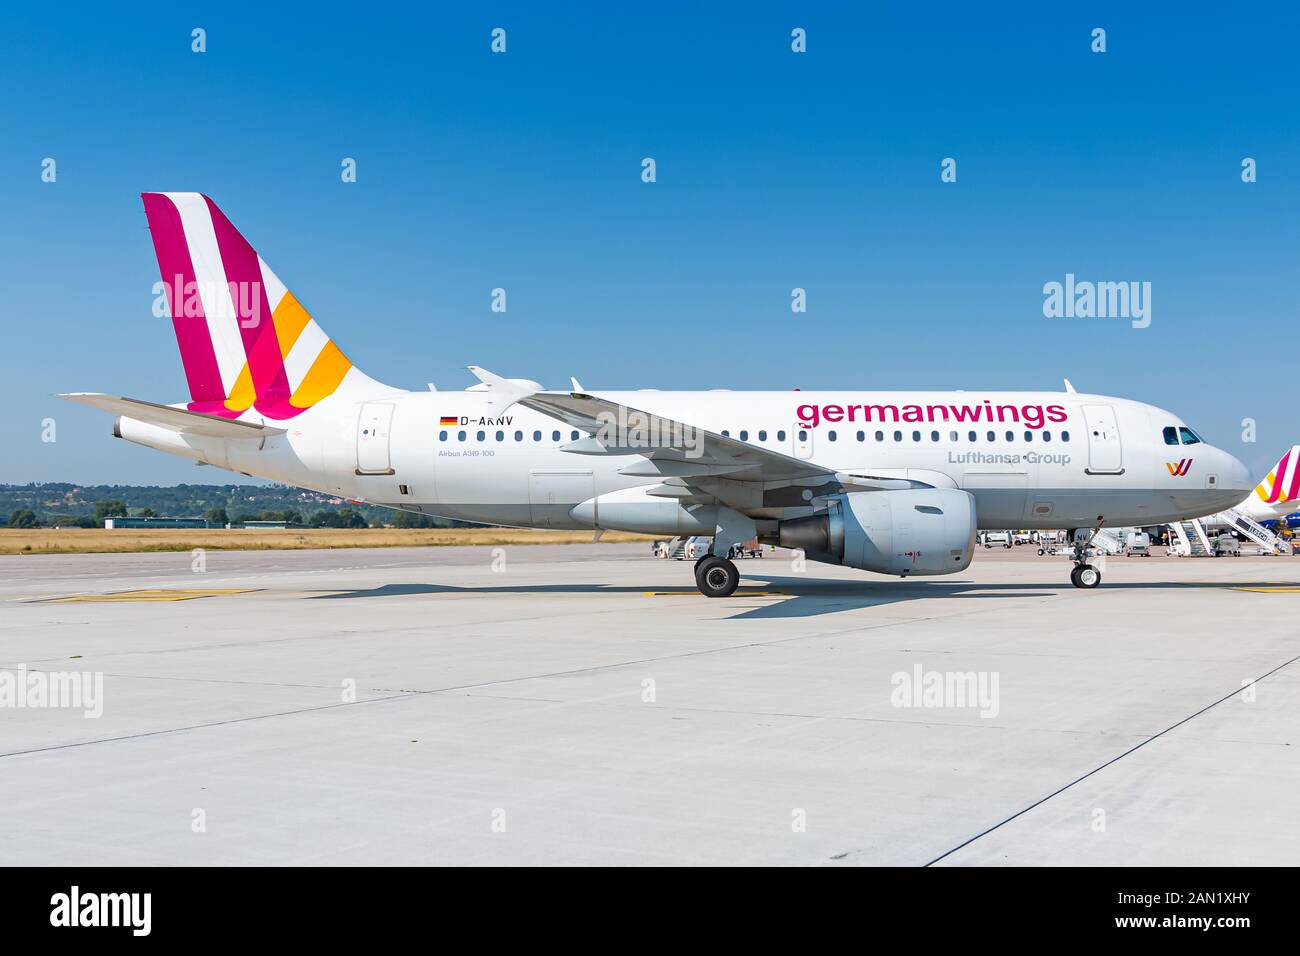 Airport Stuttgart Passengers High Resolution Stock Photography and Images -  Alamy